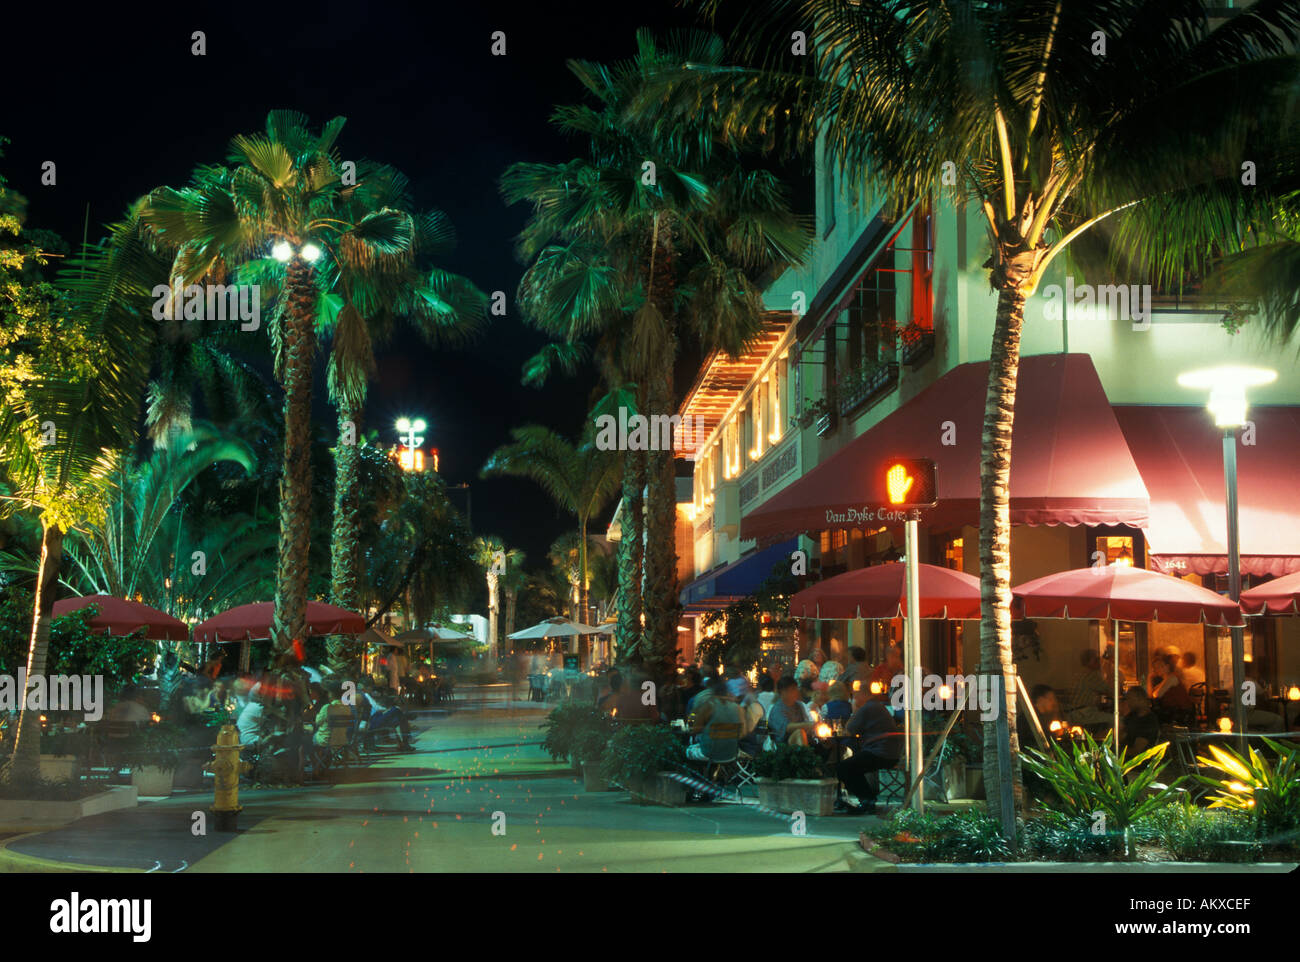 Van Dyke Cafe Lincoln Road part of 'South Beach' Stock Photo